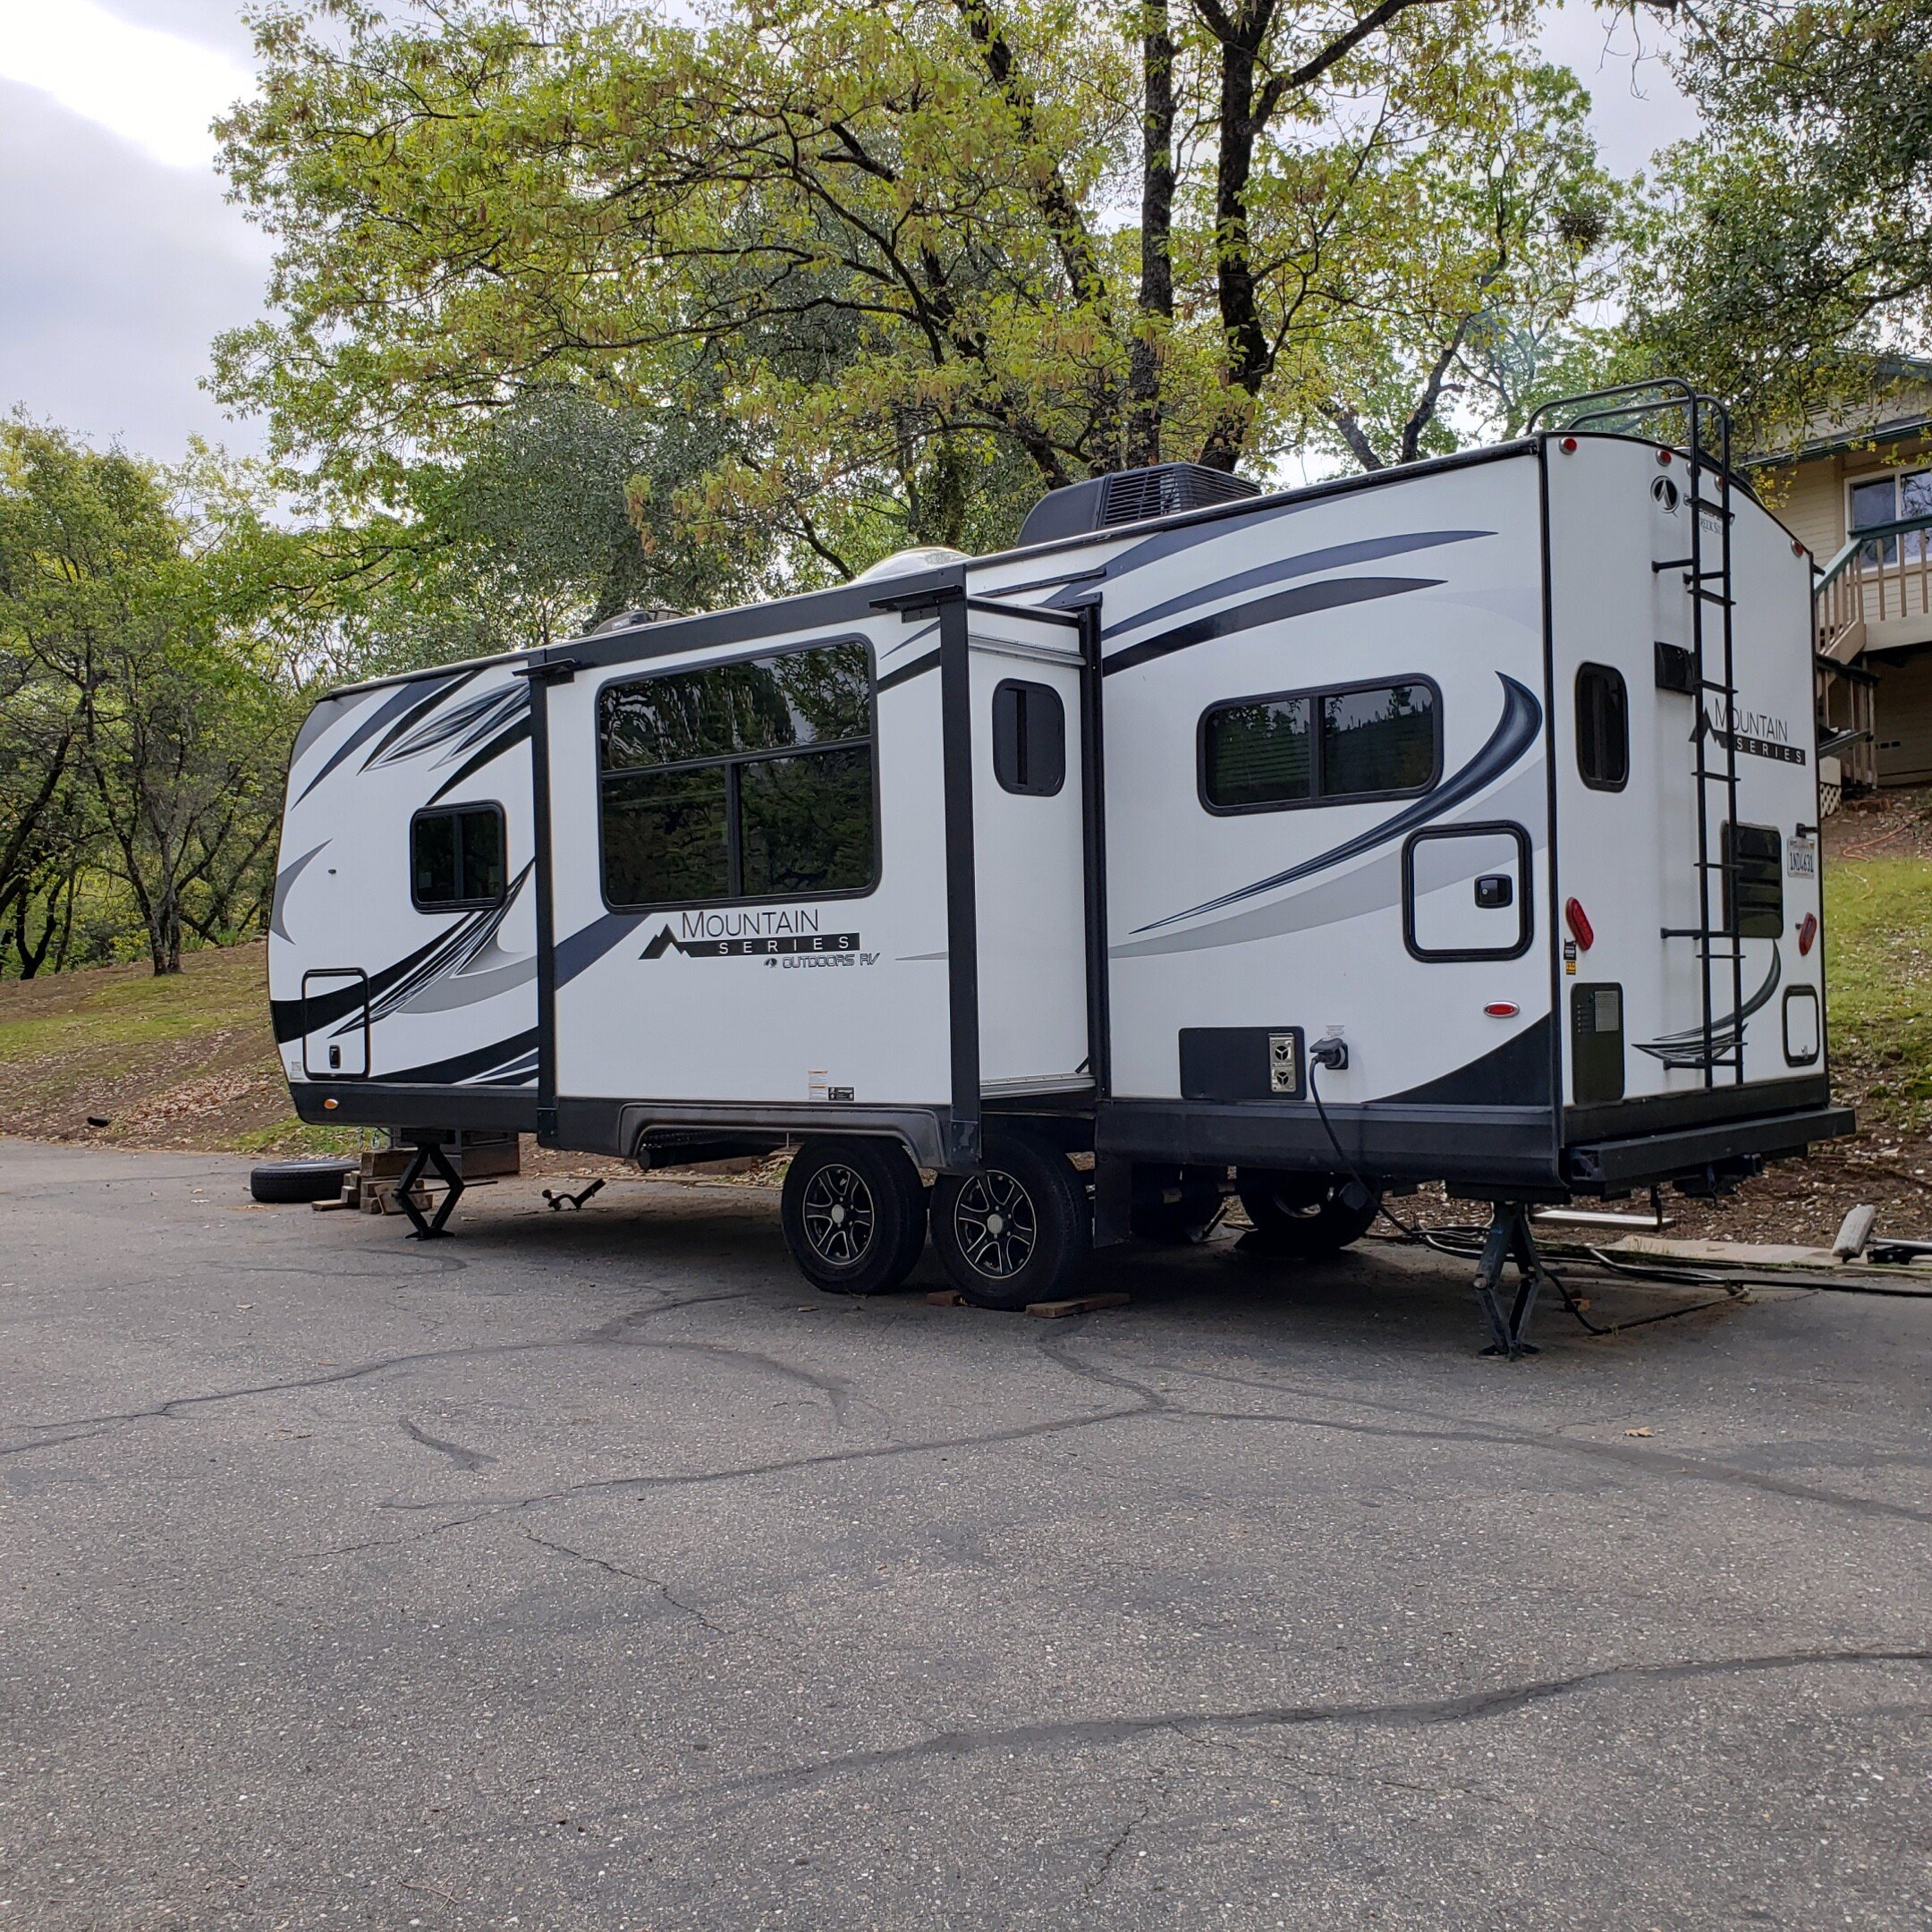 2018 Outdoors RV Creekside RVs for Sale - RVs on Autotrader